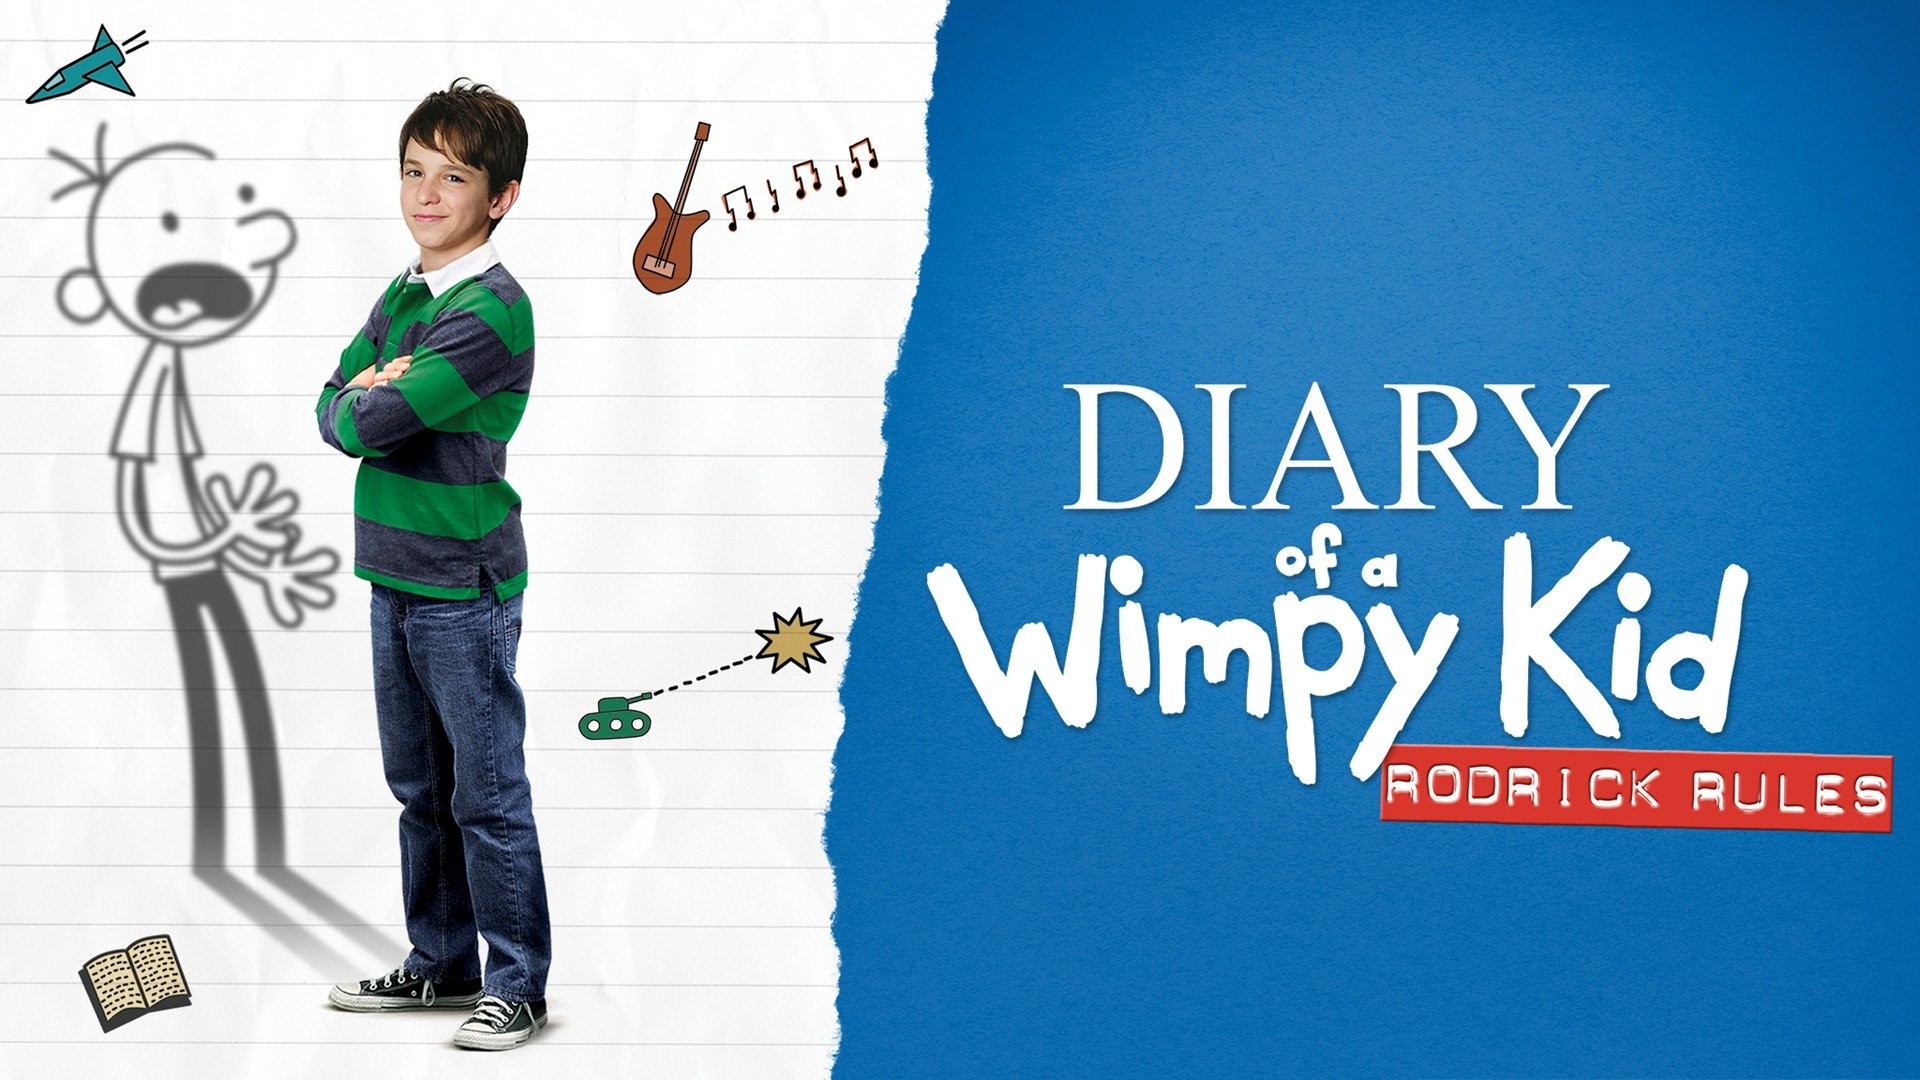 Diary of a Wimpy Kid: Rodrick Rules Showtimes